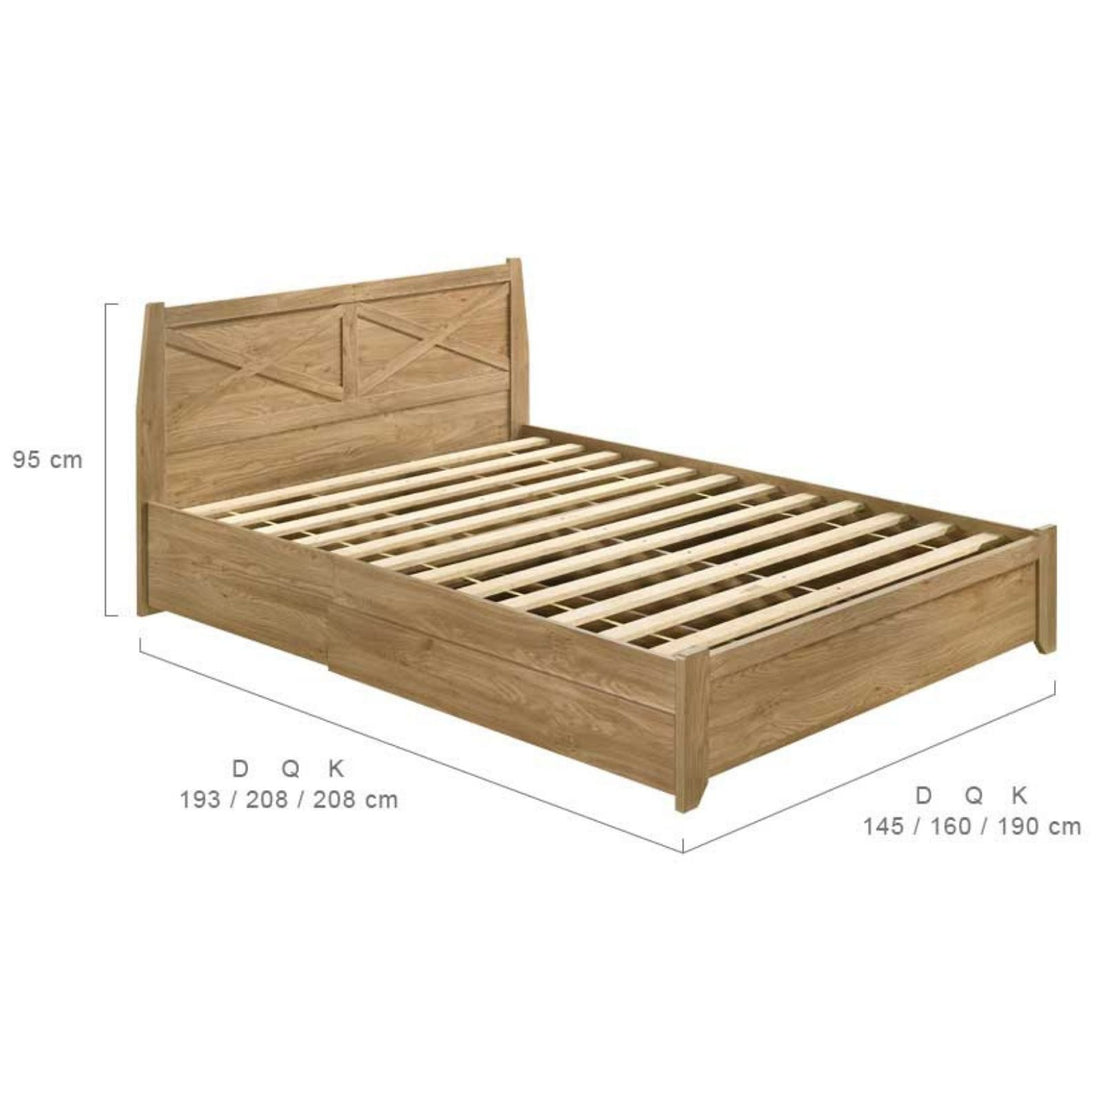 Natural Wooden Bed Frame with Storage Drawers - Double